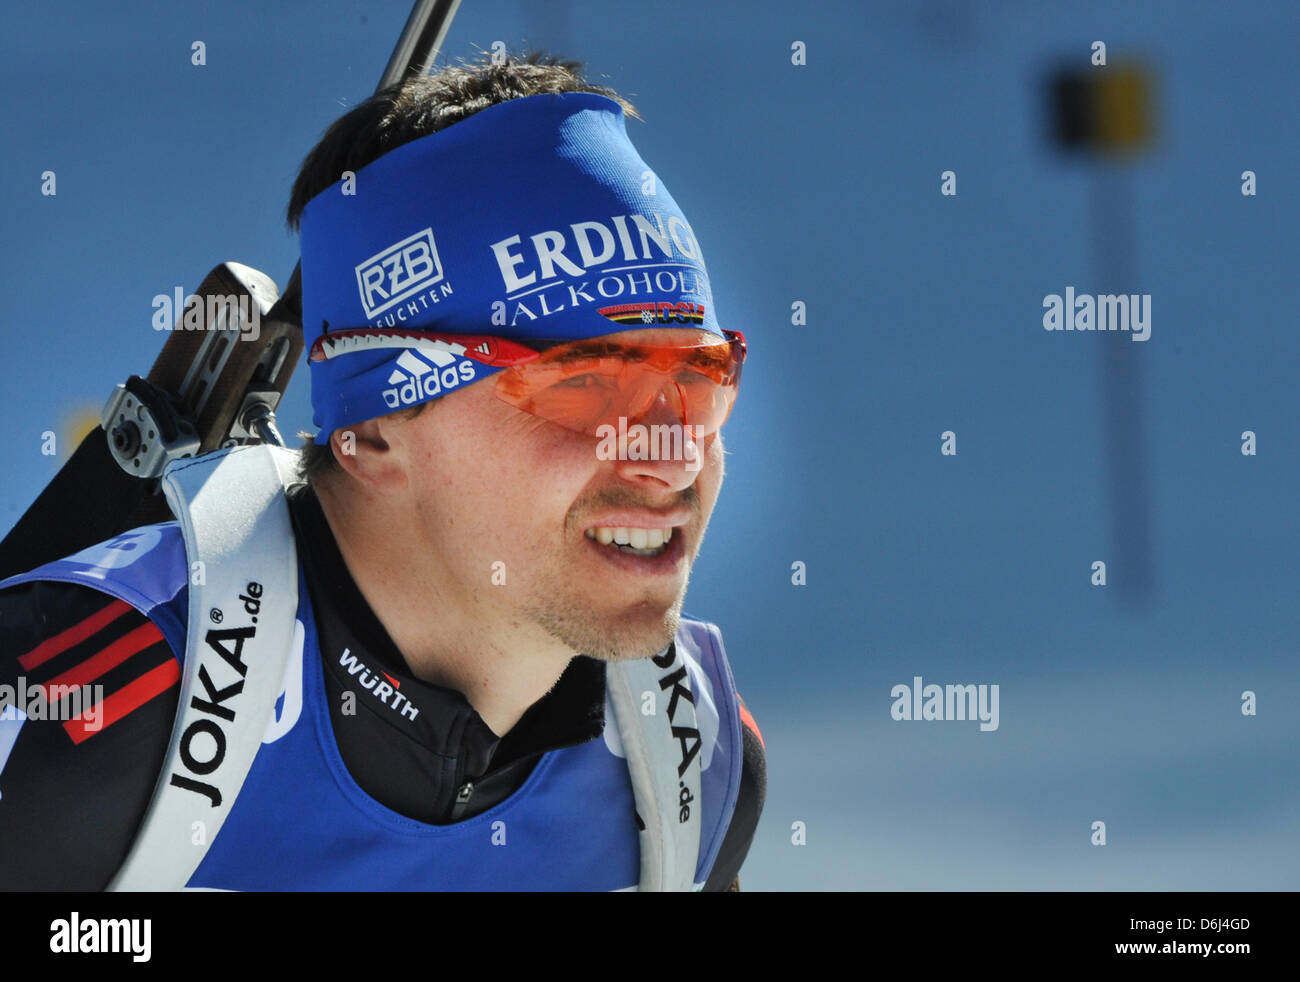 German biathlete Michael Greis is pictured during a training session of the Men's Biathlon World Championships at Chiemgau Arena in Ruhpolding, Germany, 02 March 2012. Photo: PETER KNEFFEL Stock Photo